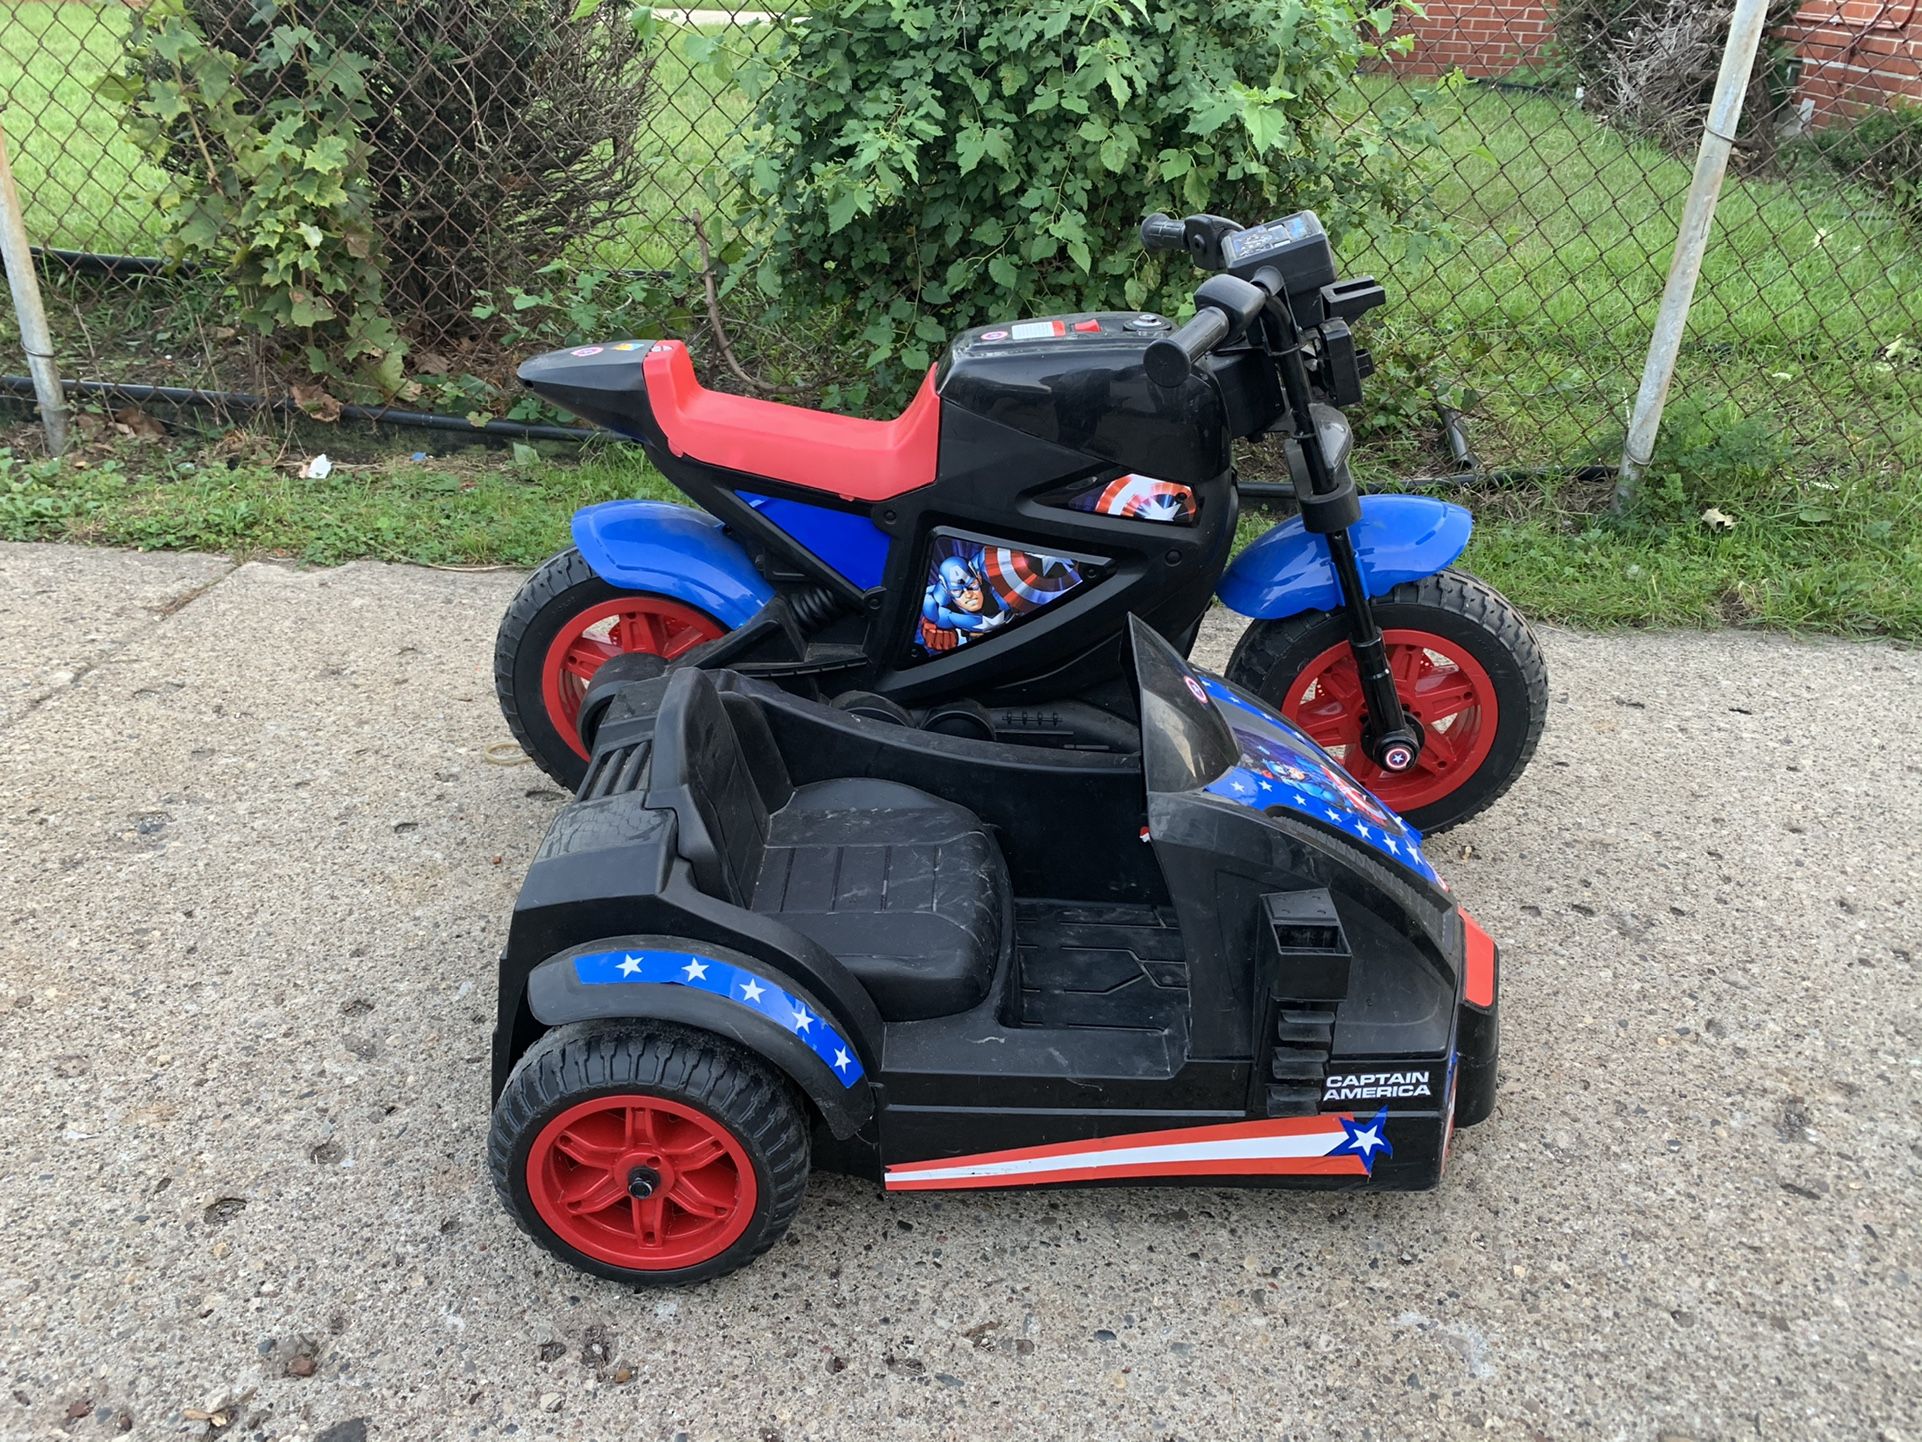 Captain America Toy Motorcycle With Sidecart (No Charger, Not Working Currently)